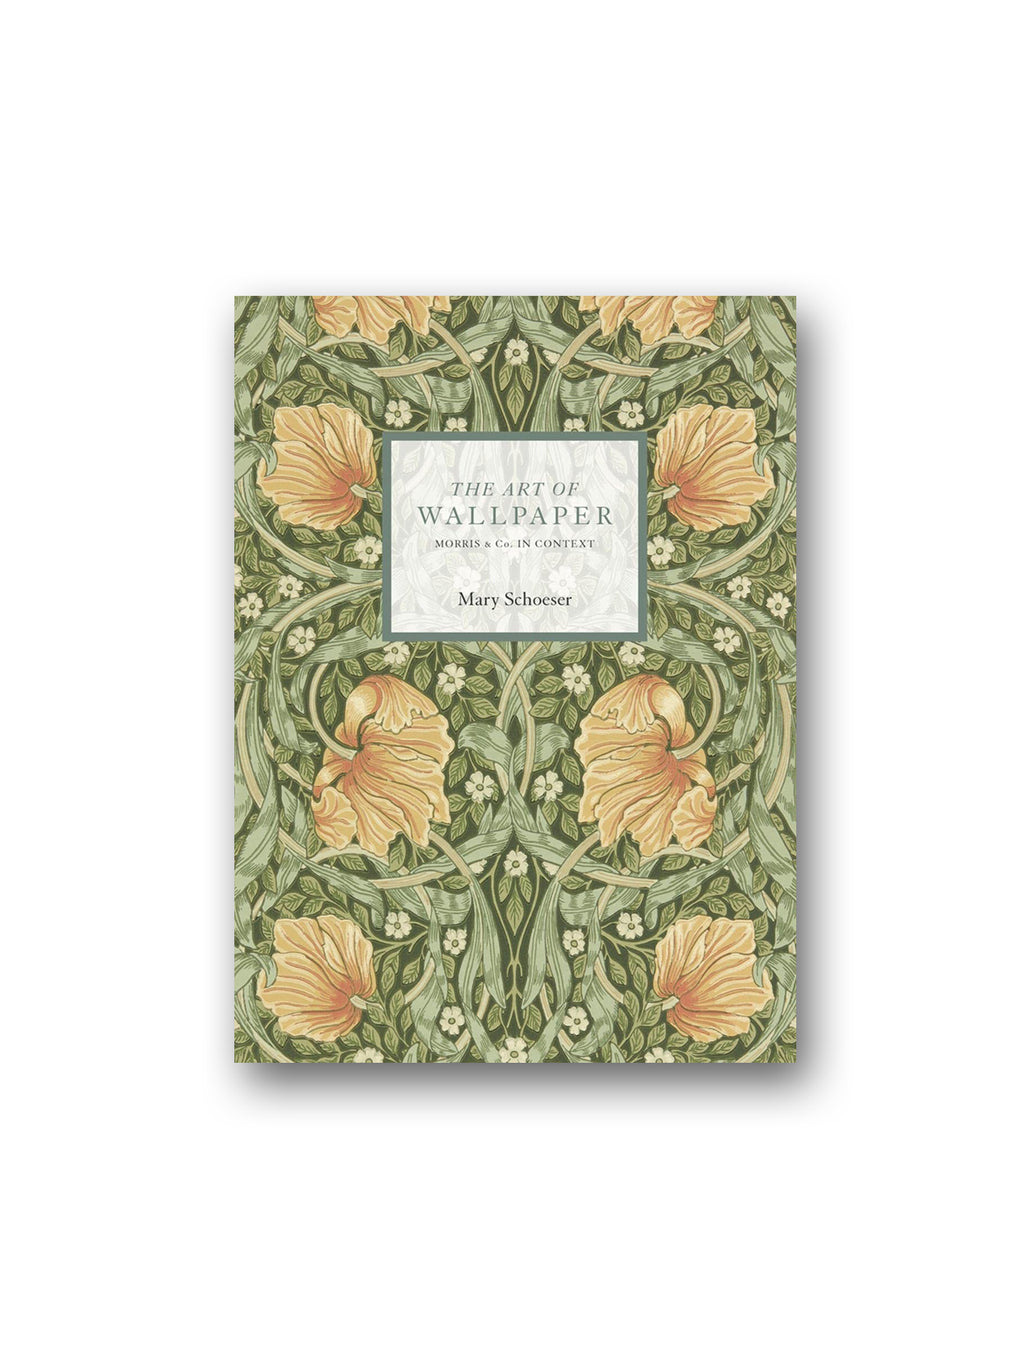 The Art of Wallpaper : Morris & Co. in Context